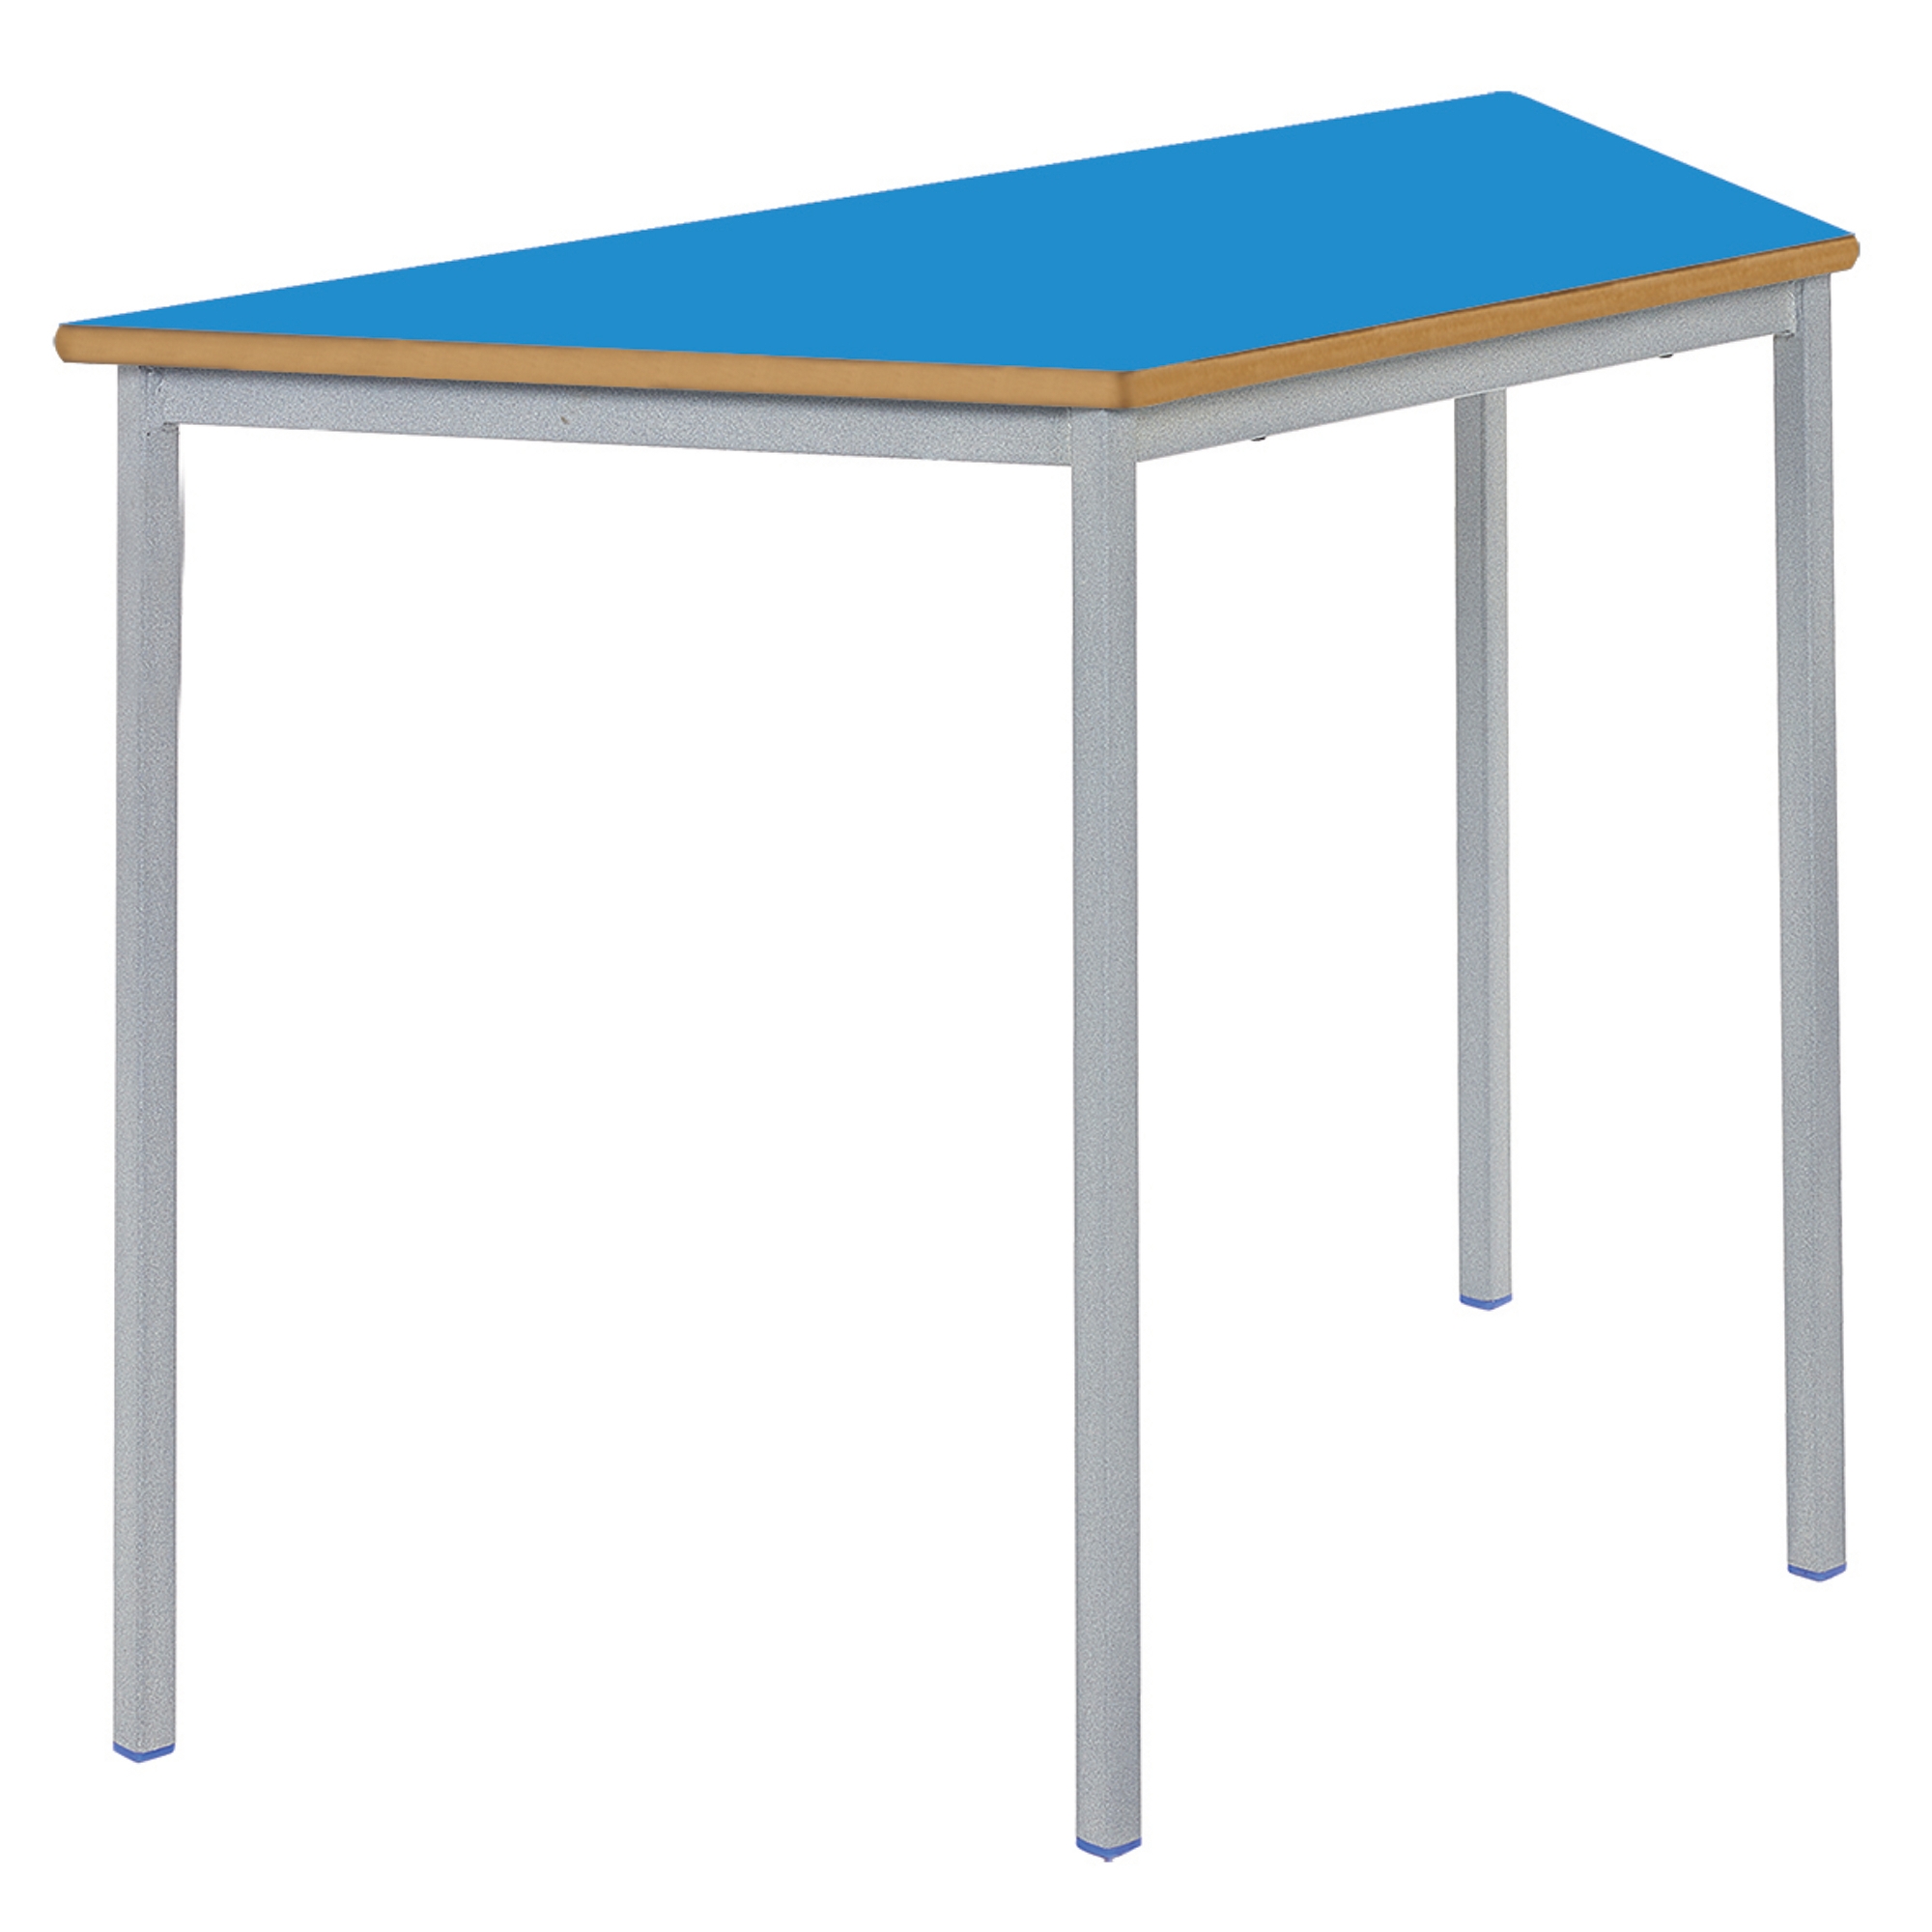 Classmates Trapezoidal Fully Welded Classroom Table - 1100 x 550 x 460mm - Blue